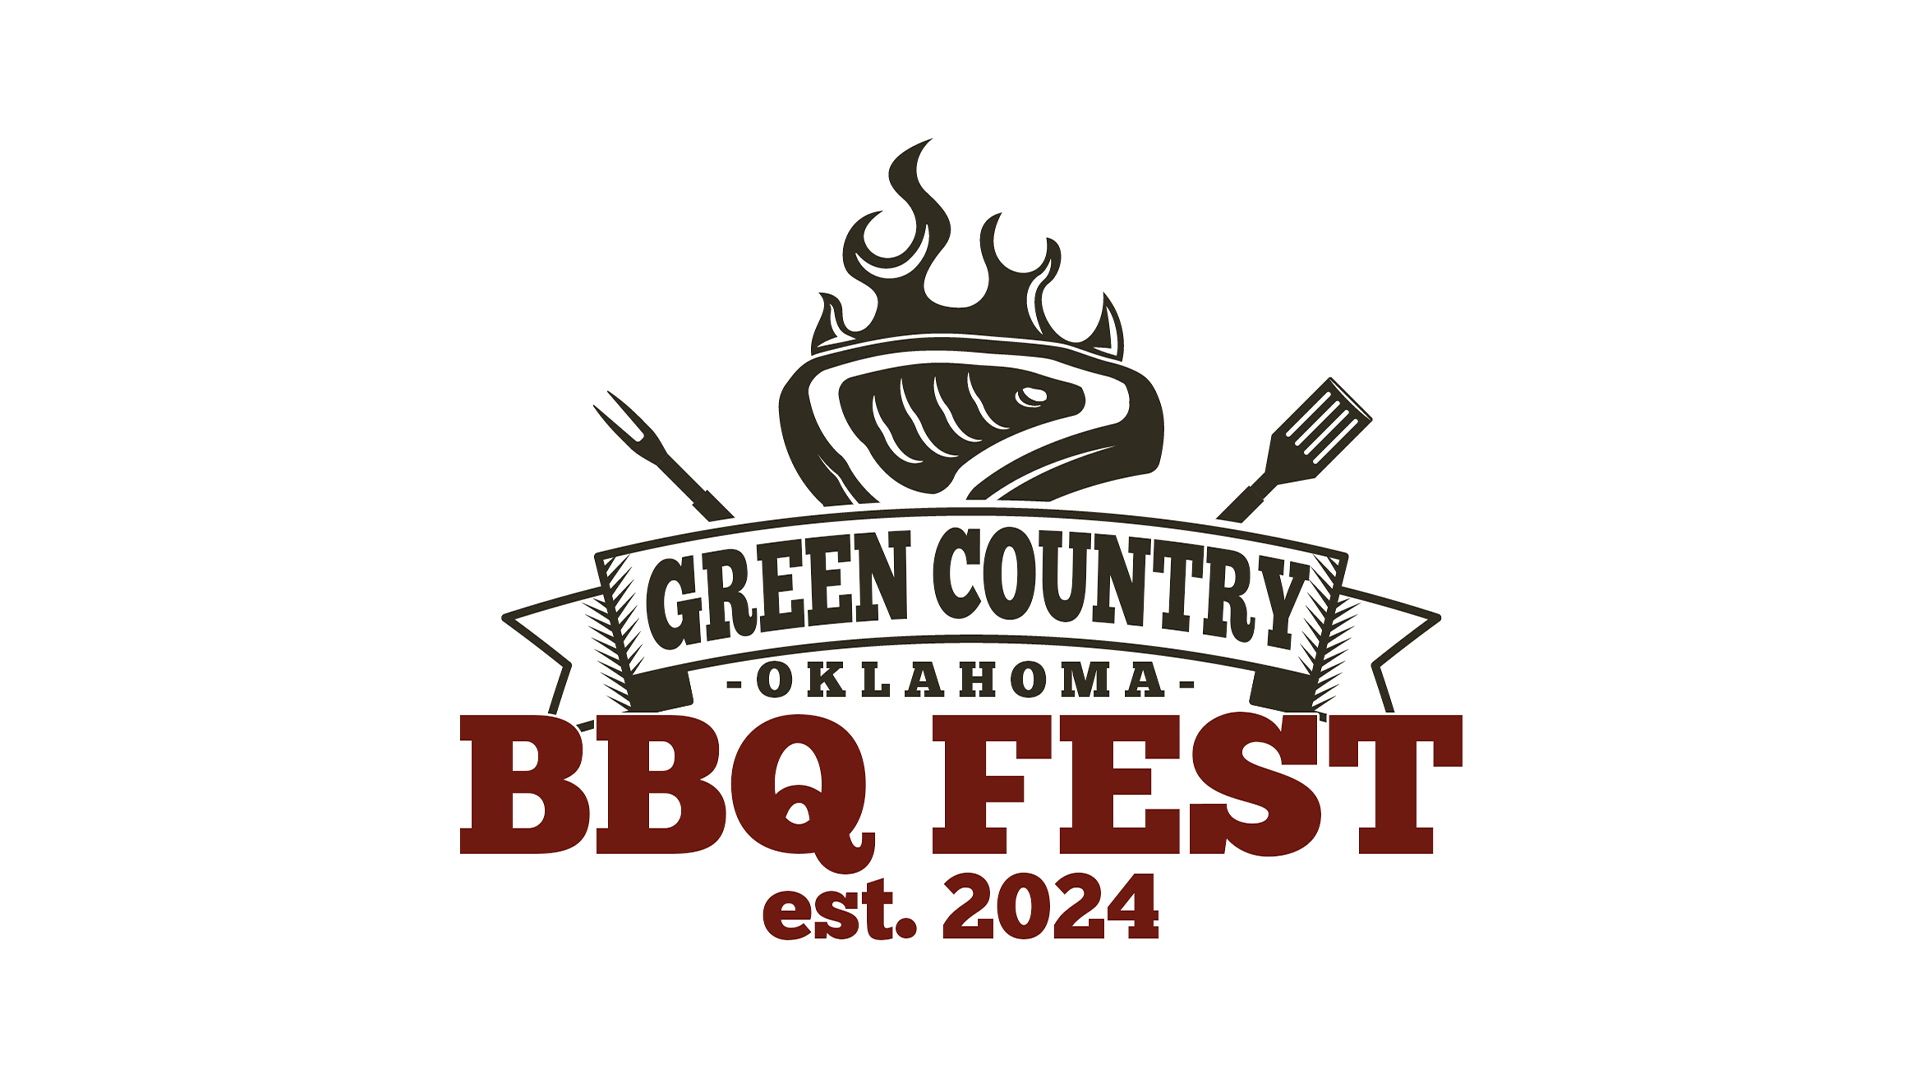 Green Country BBQ Festival est. 2024